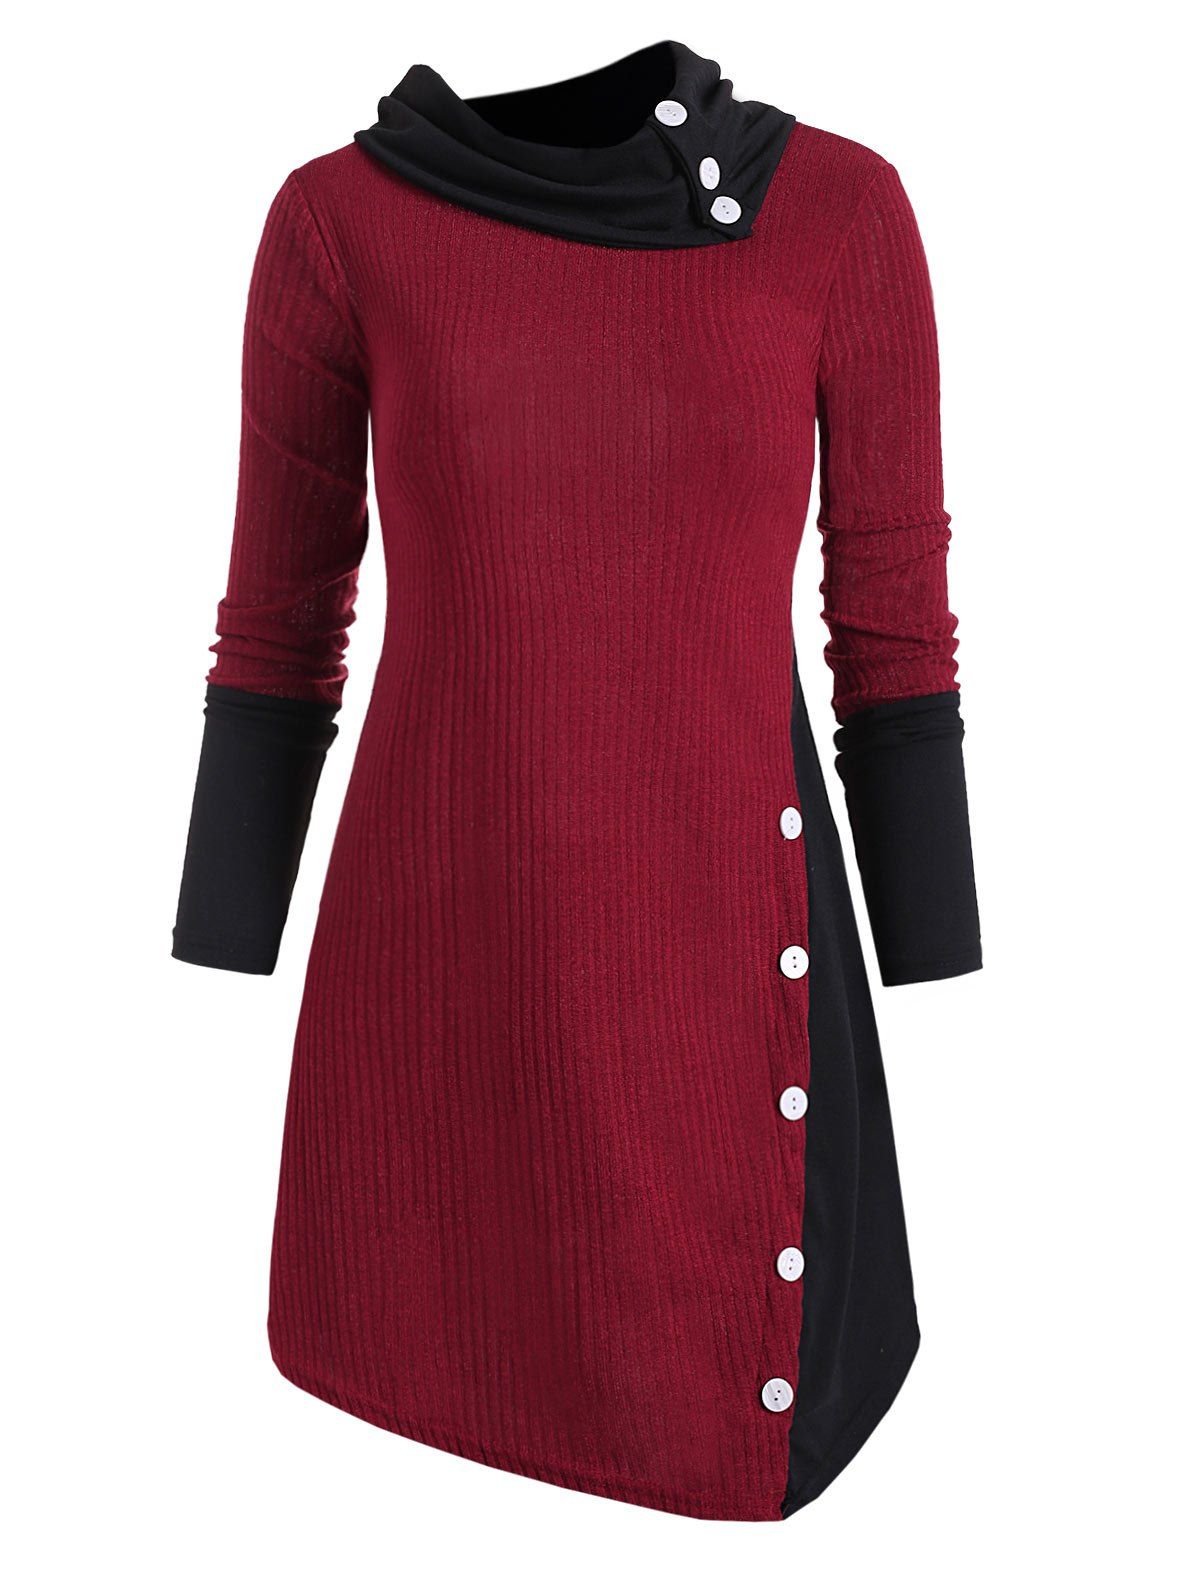 

Two Tone Ribbed Knit Mock Knit Tunic Knitwear, Red wine